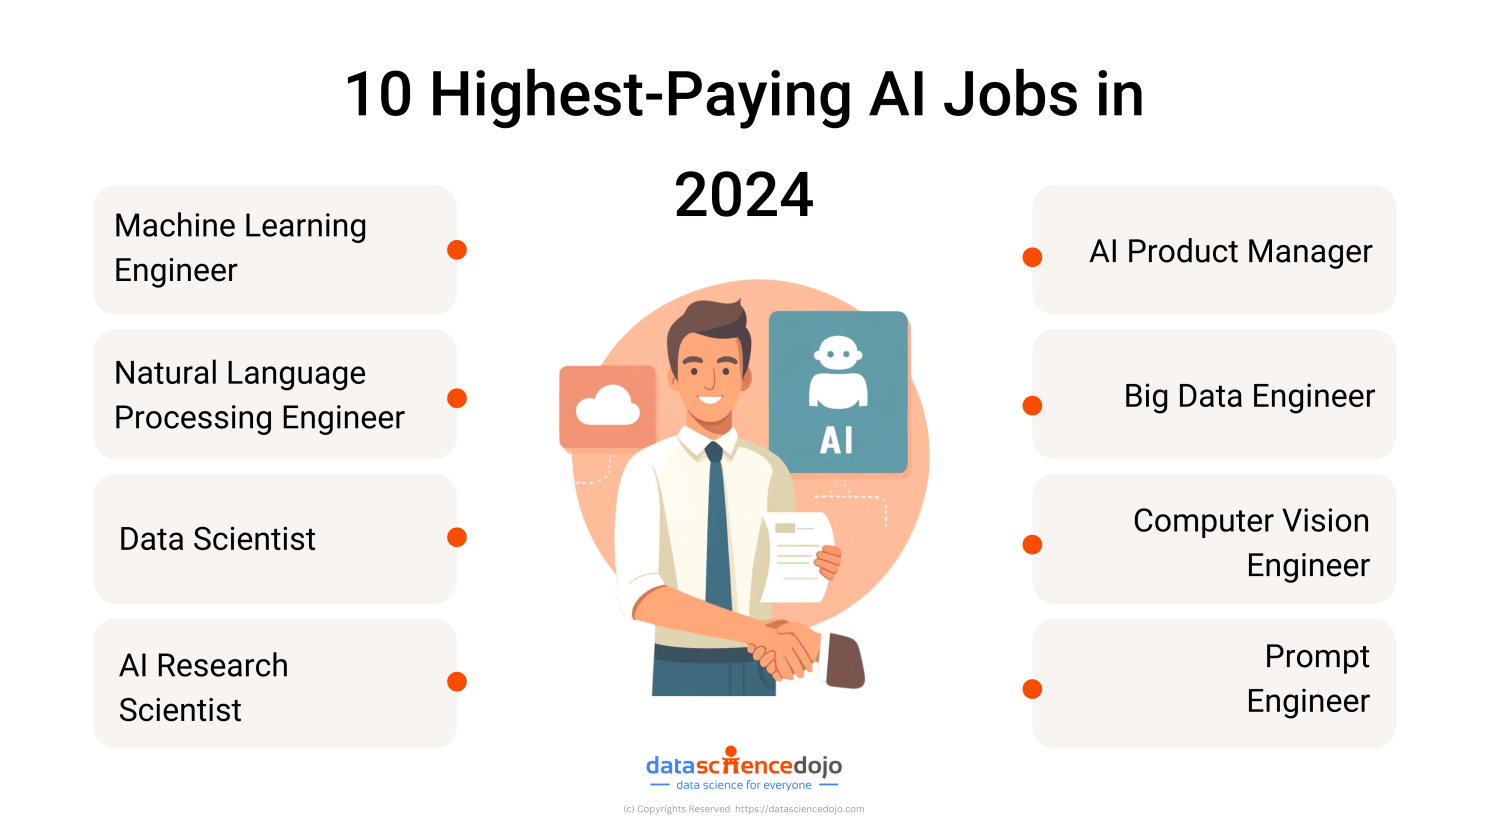 10 highest paying AI jobs in 2024